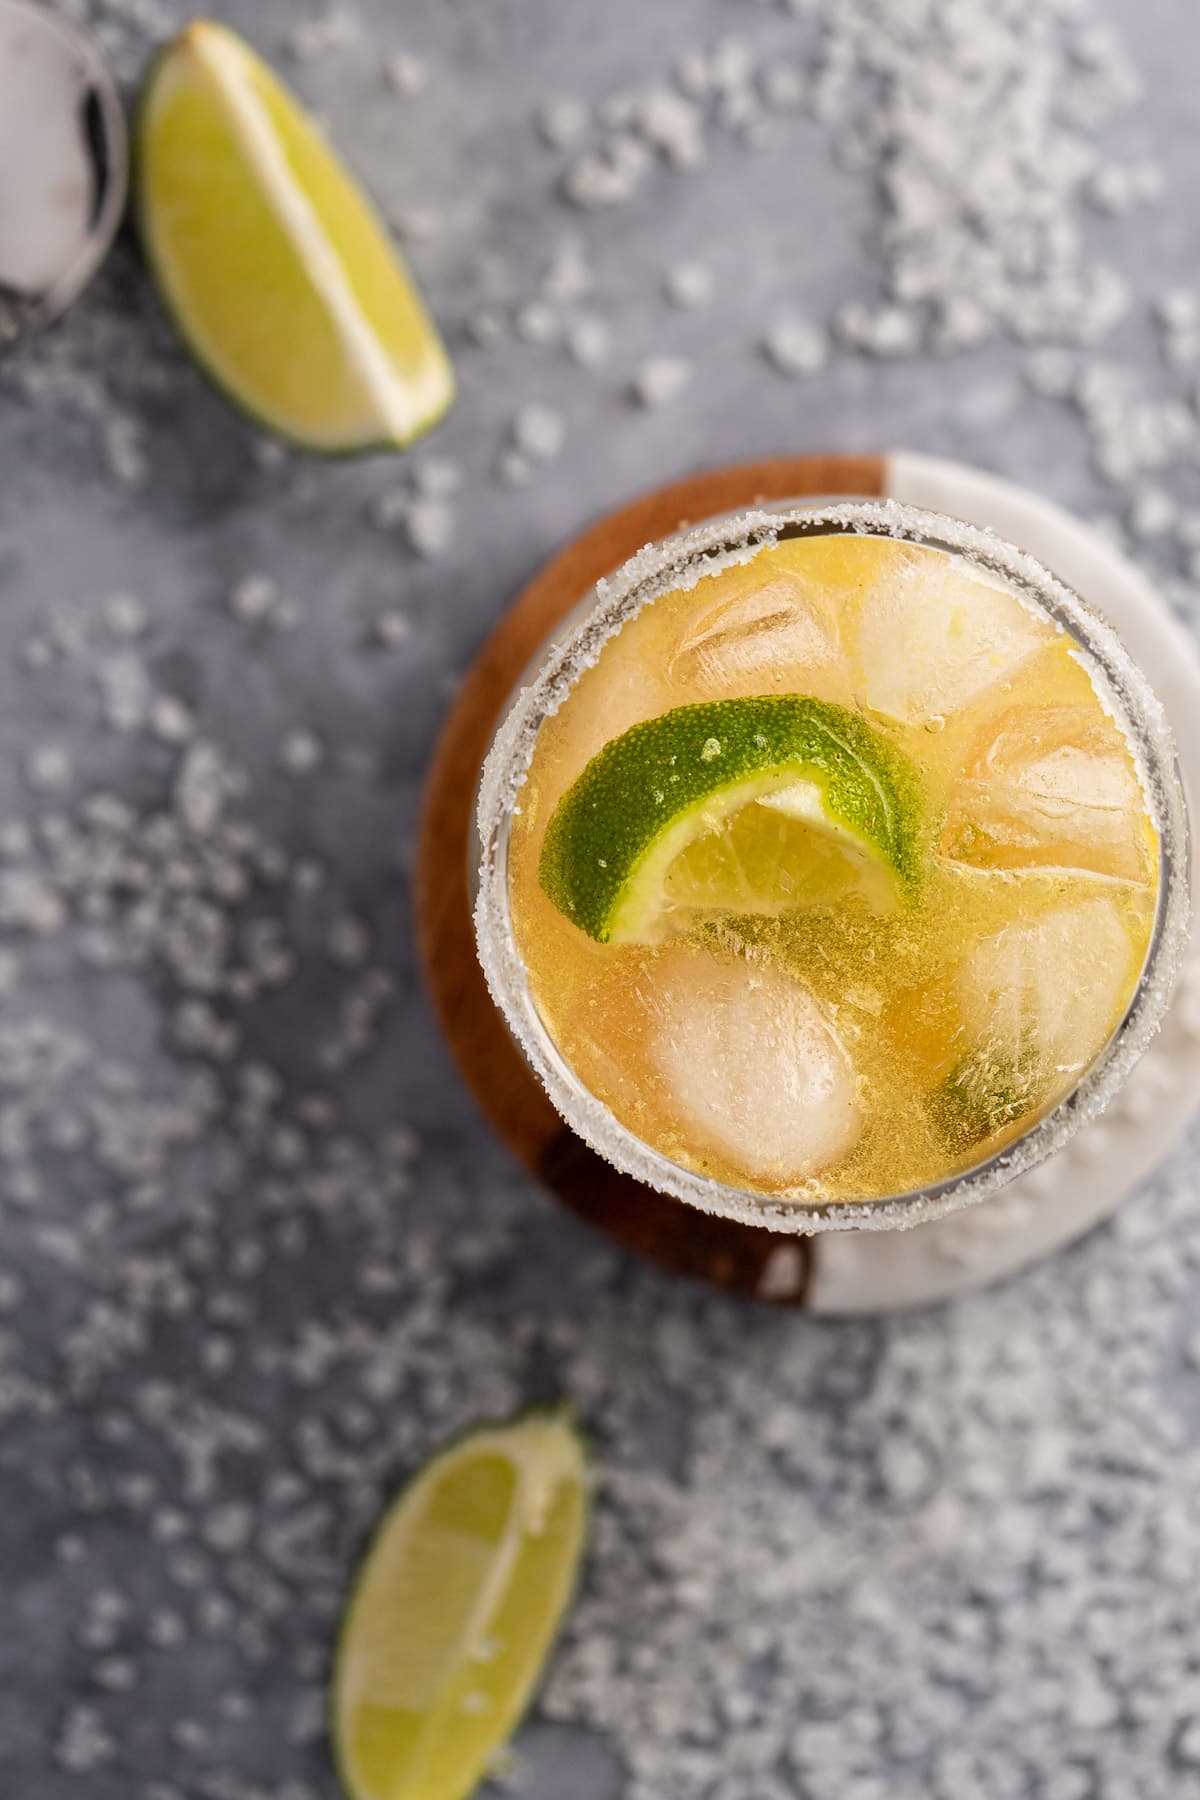 Overhead view of a margarita made with whiskey, on a table scattered with lime slices and salt.